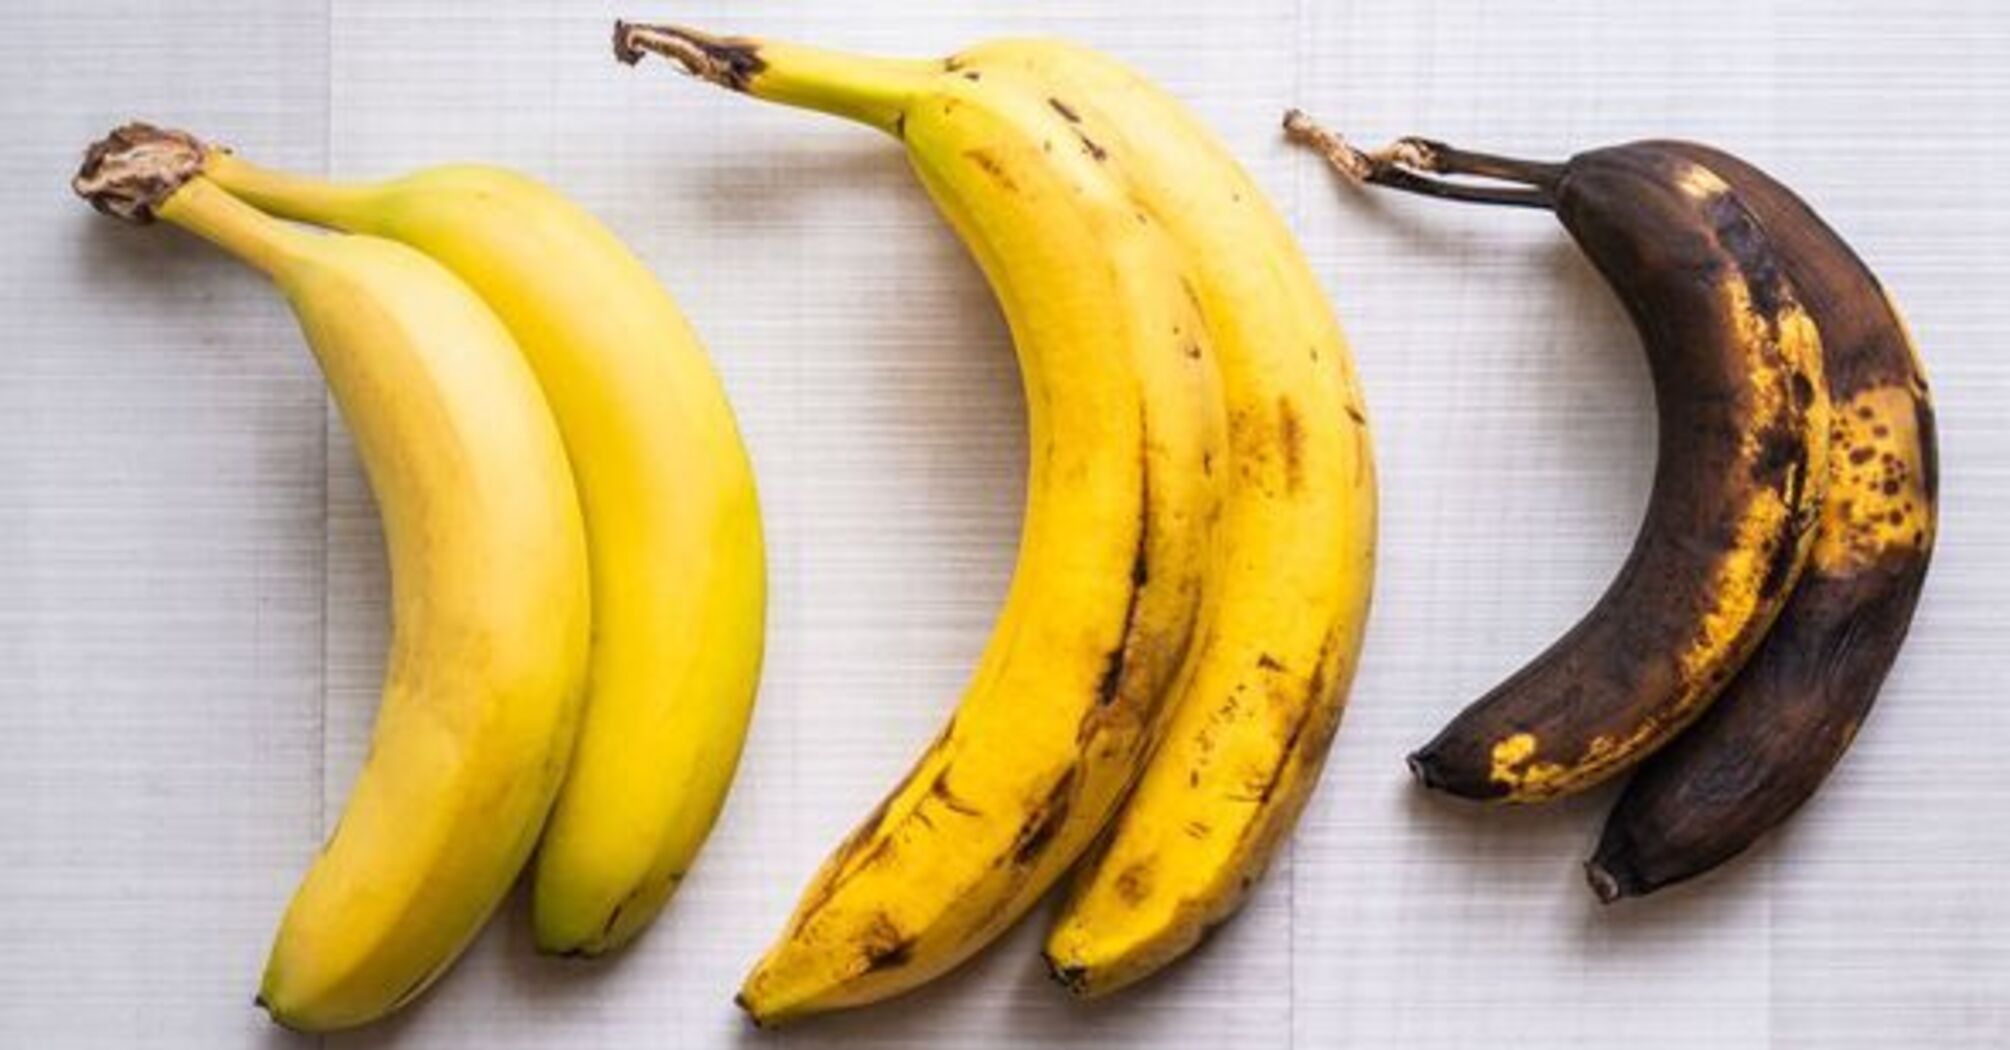 Expert explains how to keep bananas ripe for up to 16 days